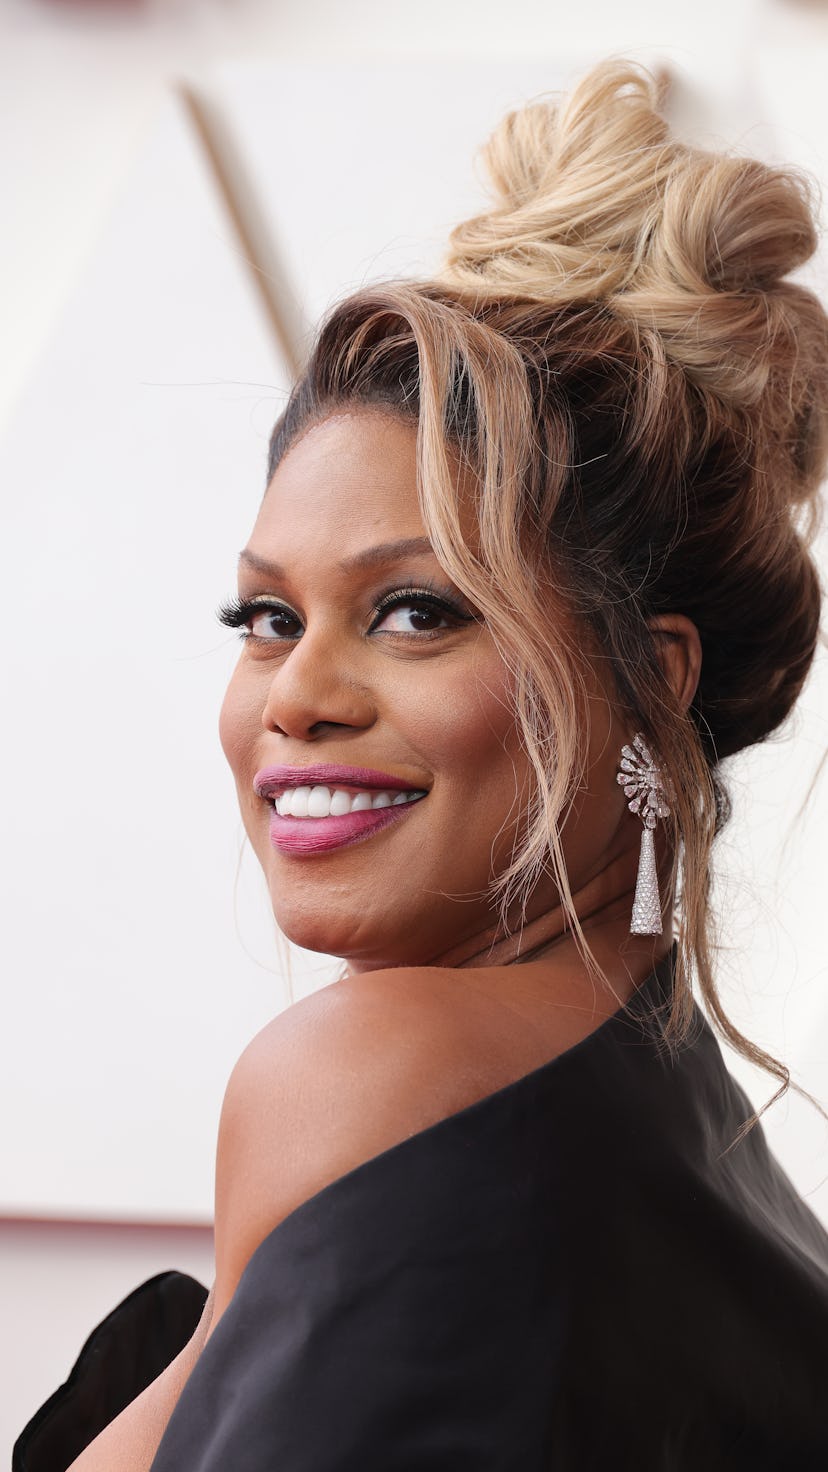 Twitter reacted to Laverne Cox as E!'s correspondent for the 2022 Oscars red carpet.